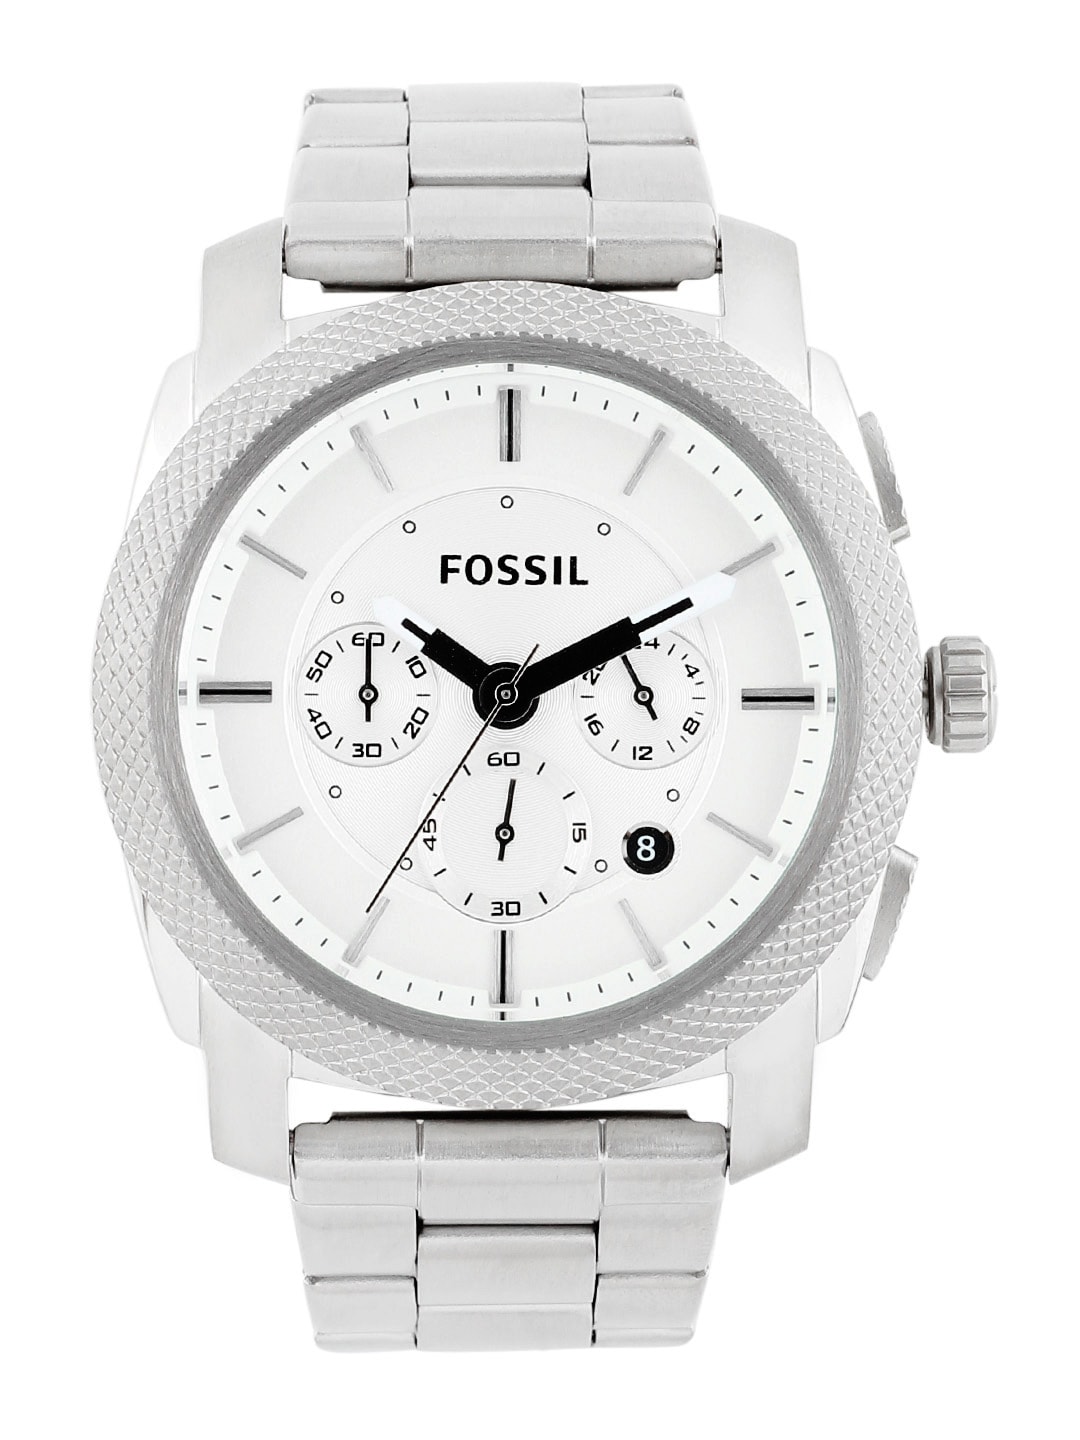 Fossil Men Silver-Toned Dial Chronograph Watch FS4663